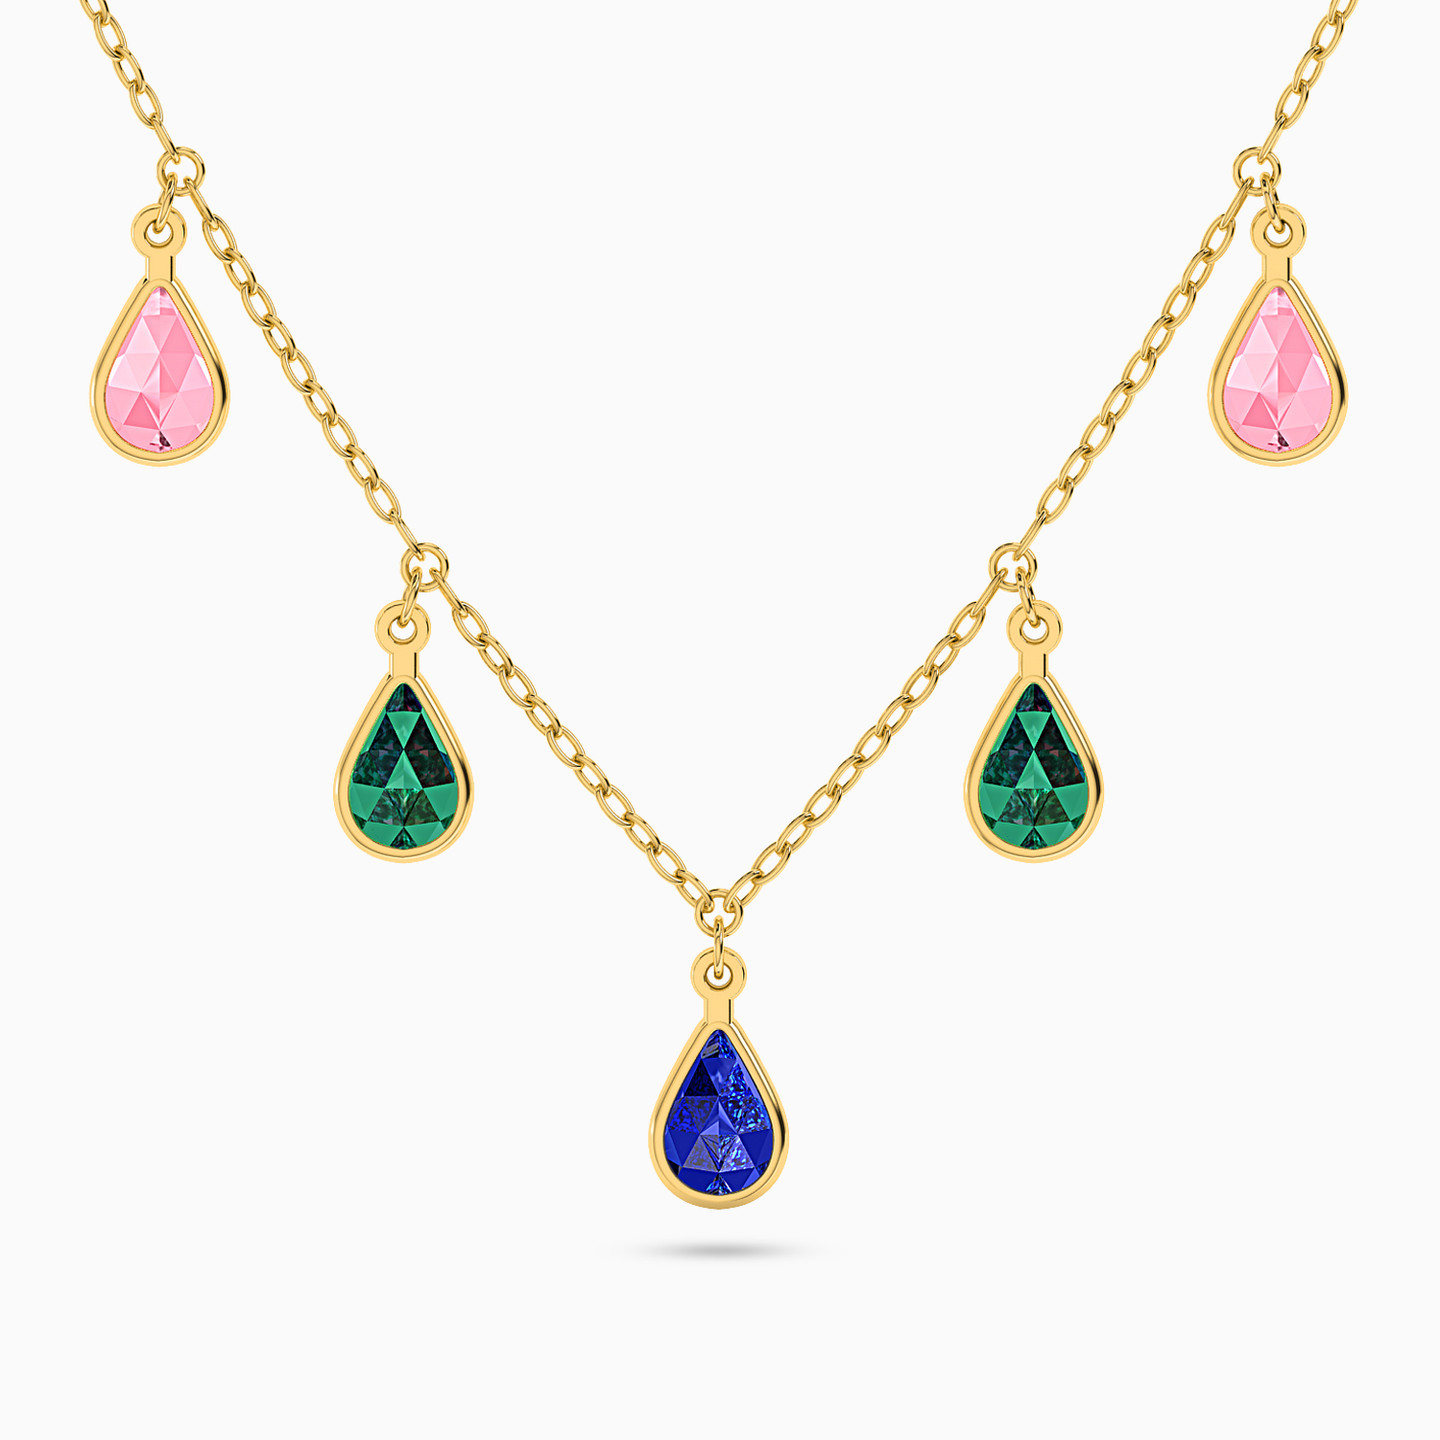 18K Gold Colored Stones Chain Necklace